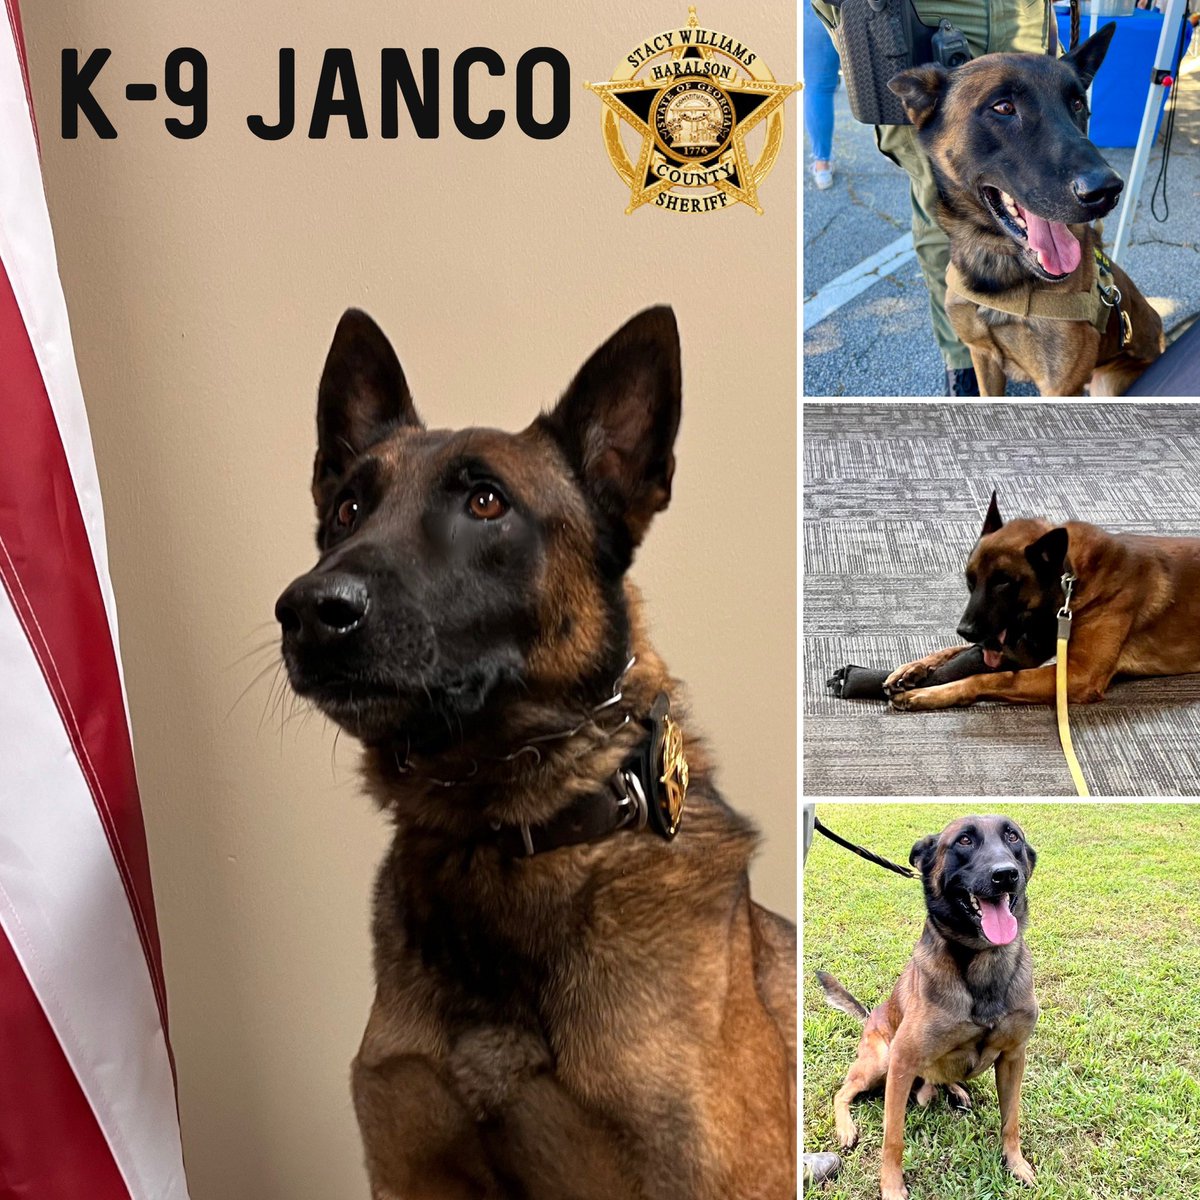 Wishing a Happy National Dog Day to our very own K-9 Janco! We at the @HaralsonSheriff may be a little biased, but we think he’s tops!! 

#K9Janco 
#NationalDogDay 
#GoodBoy
#WorkingDog 
#CrimeFighter 
#ThatFace 
#MalinoisK9 
#Handsome 
#K9Unit 
#HCSO